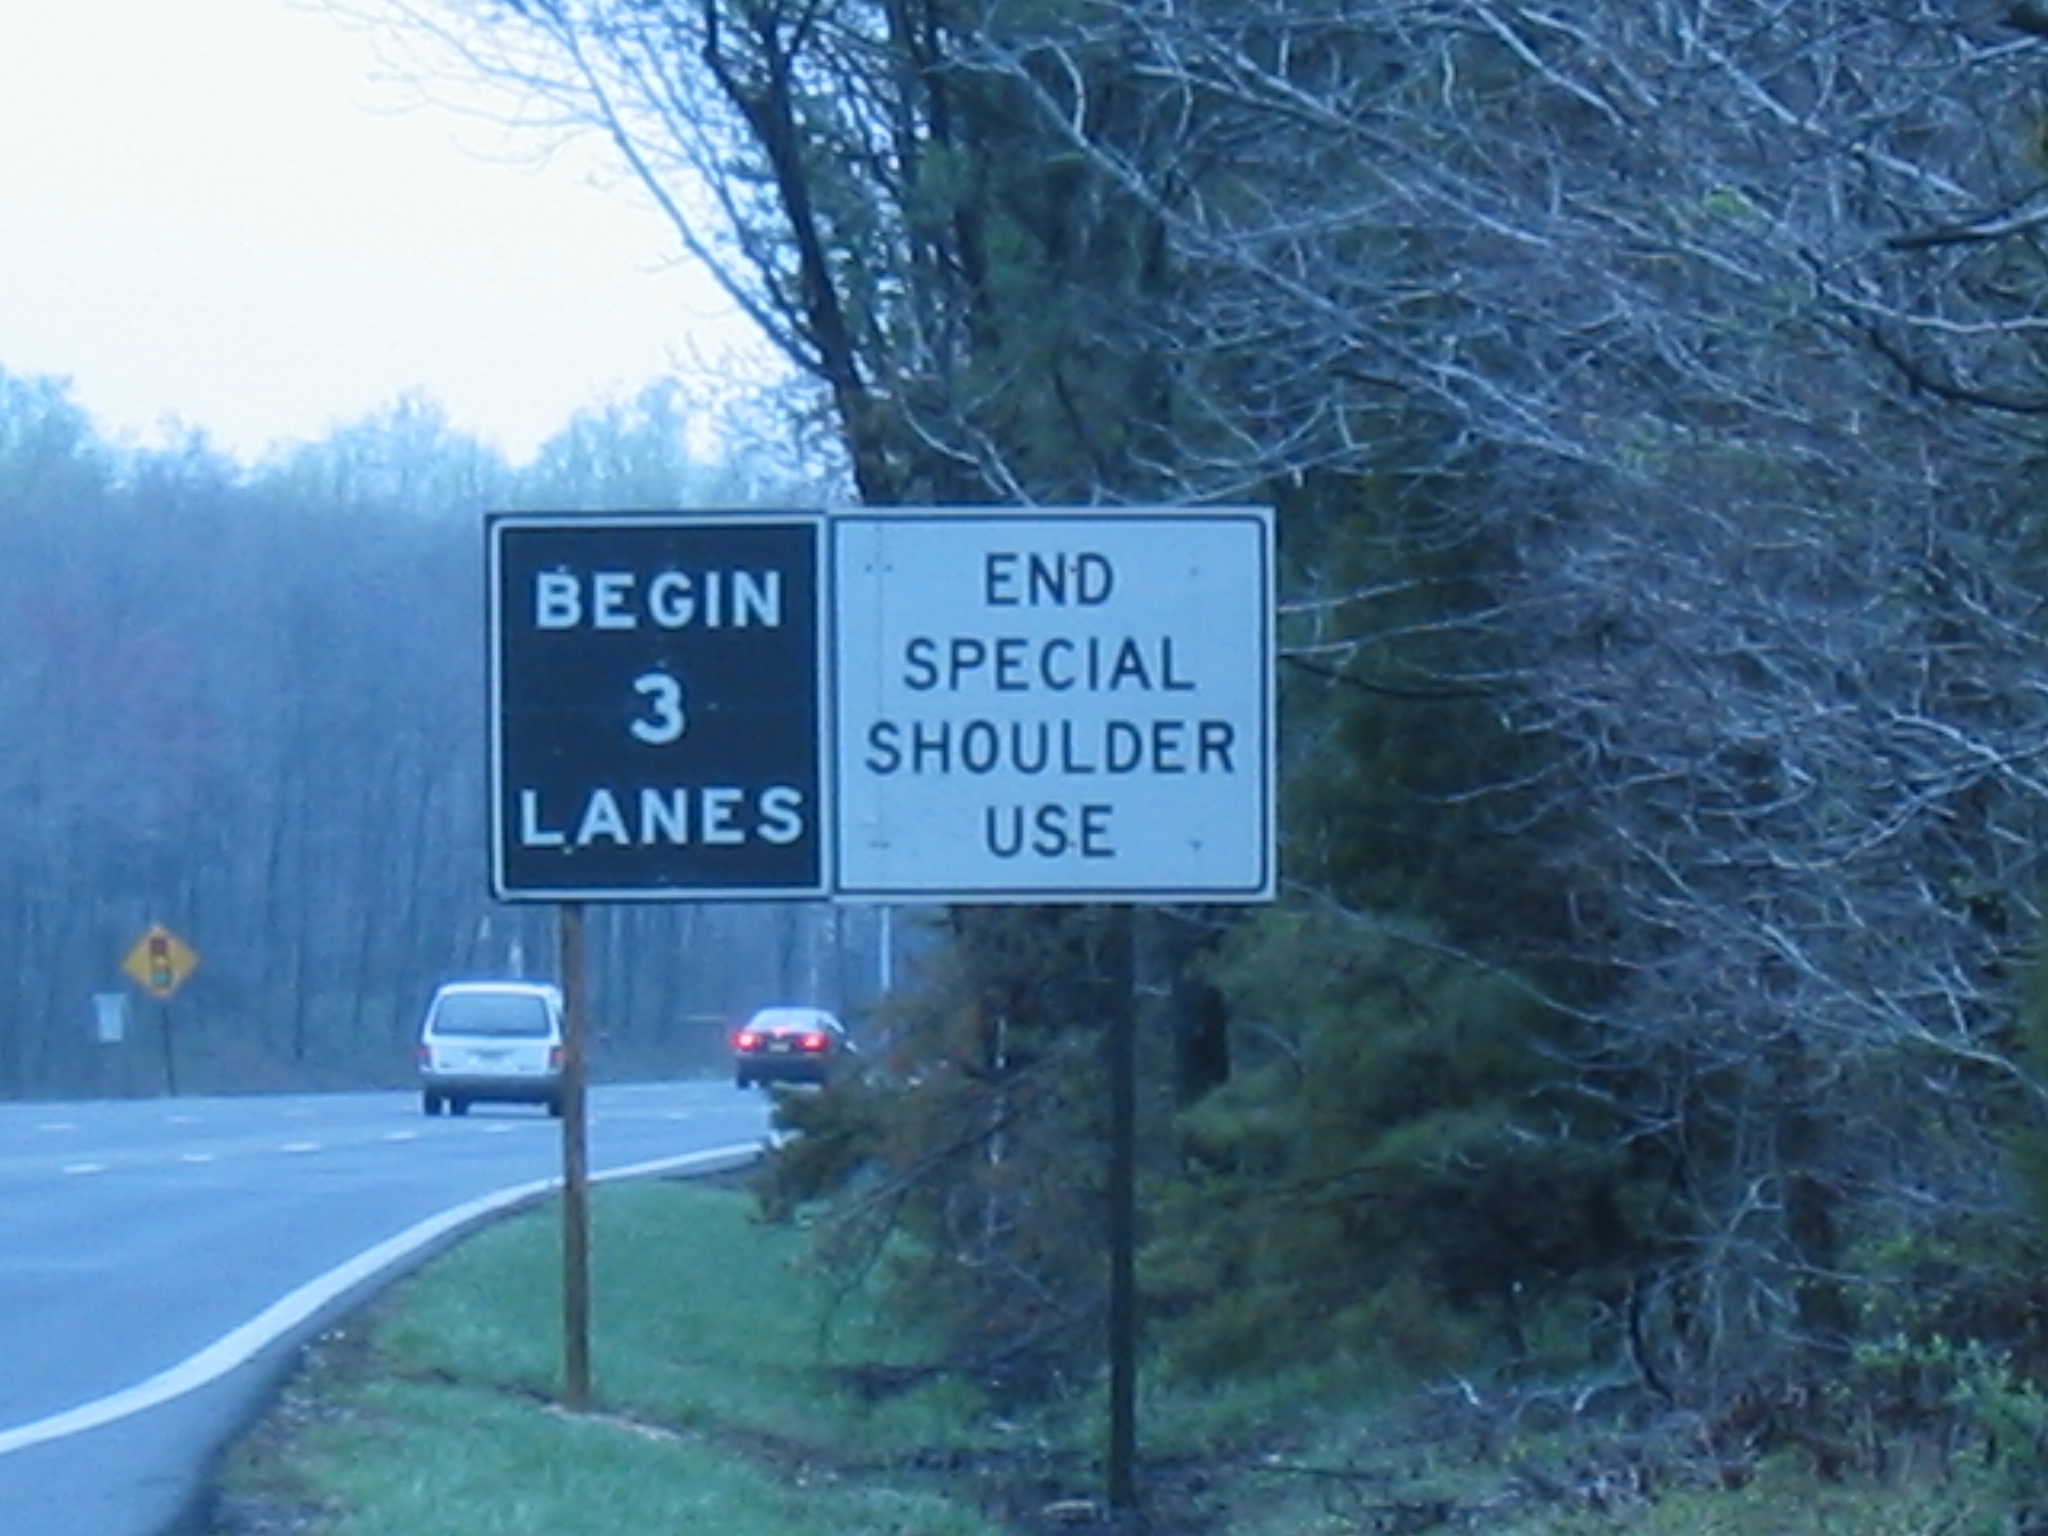 photo showing sign to the right of a roadway with the words "Begin 3 lanes, end special shoulder use"